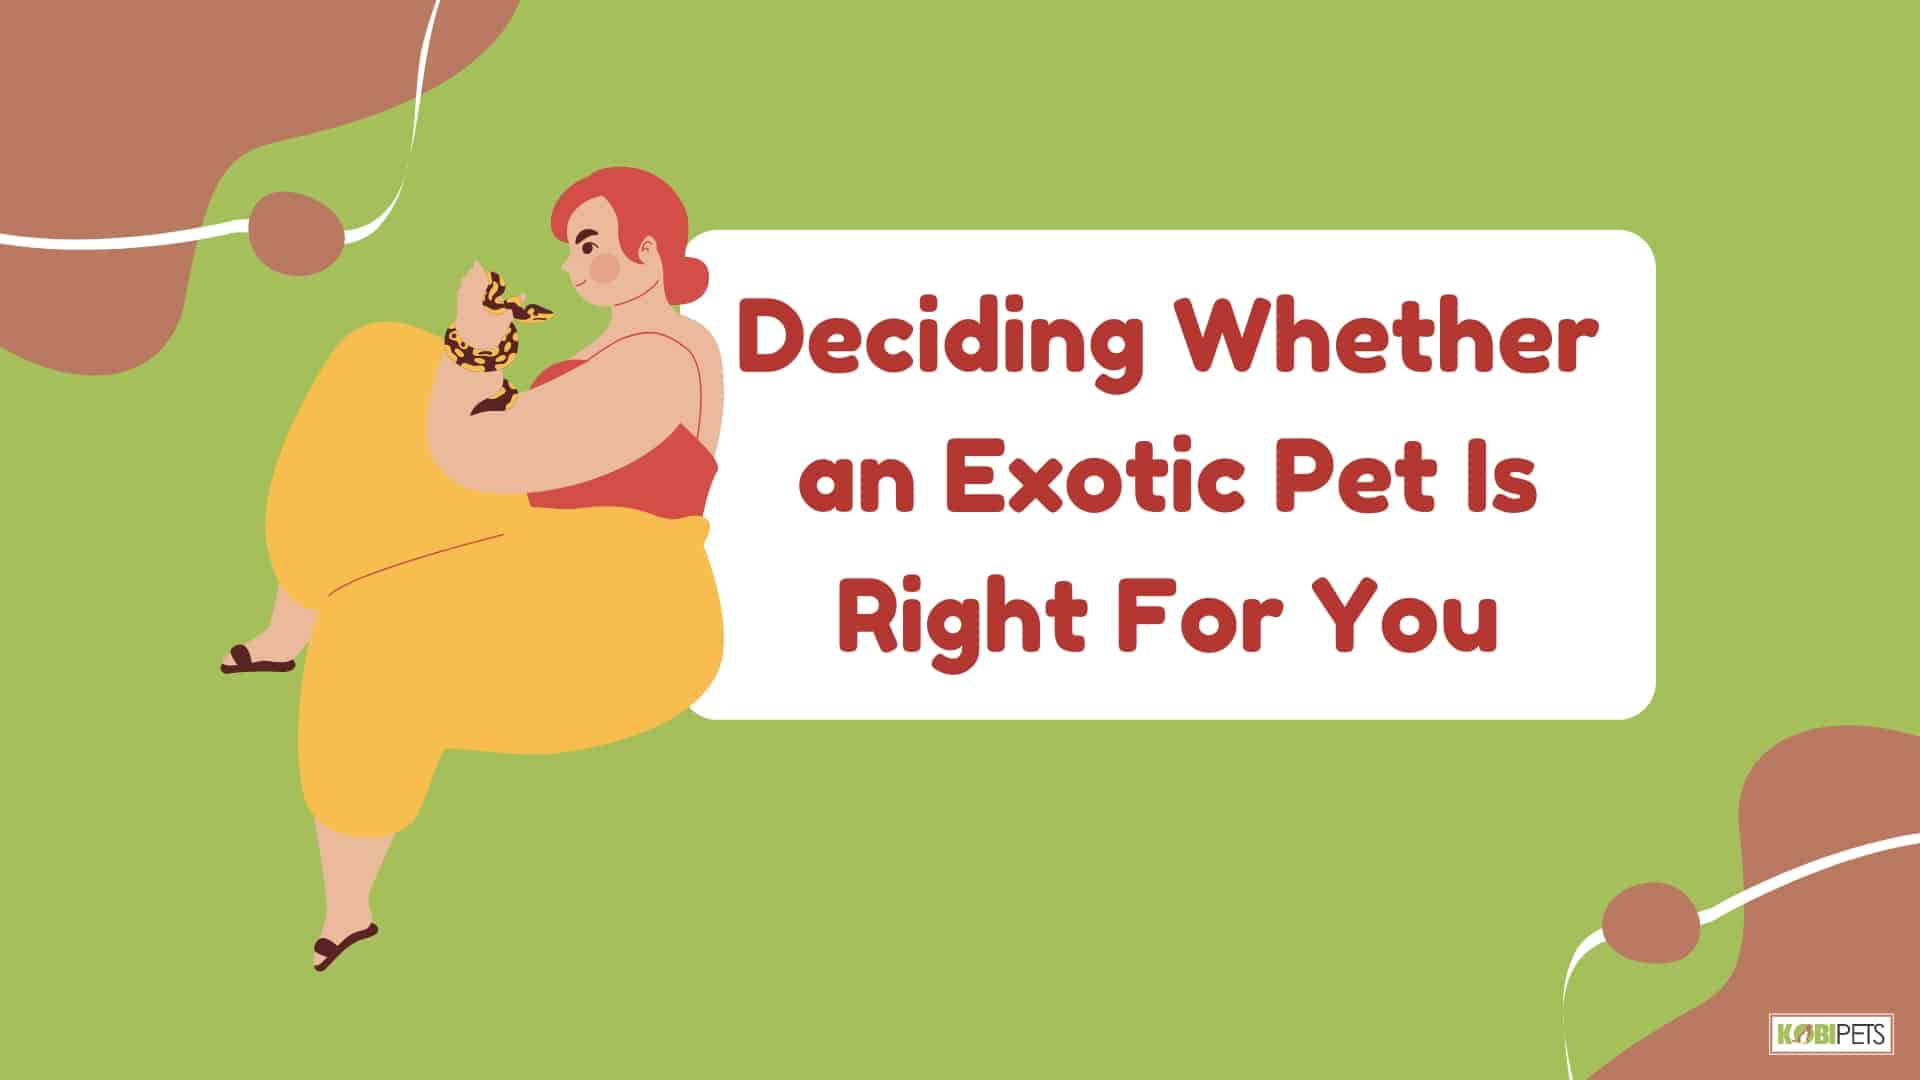 Deciding Whether an Exotic Pet Is Right For You